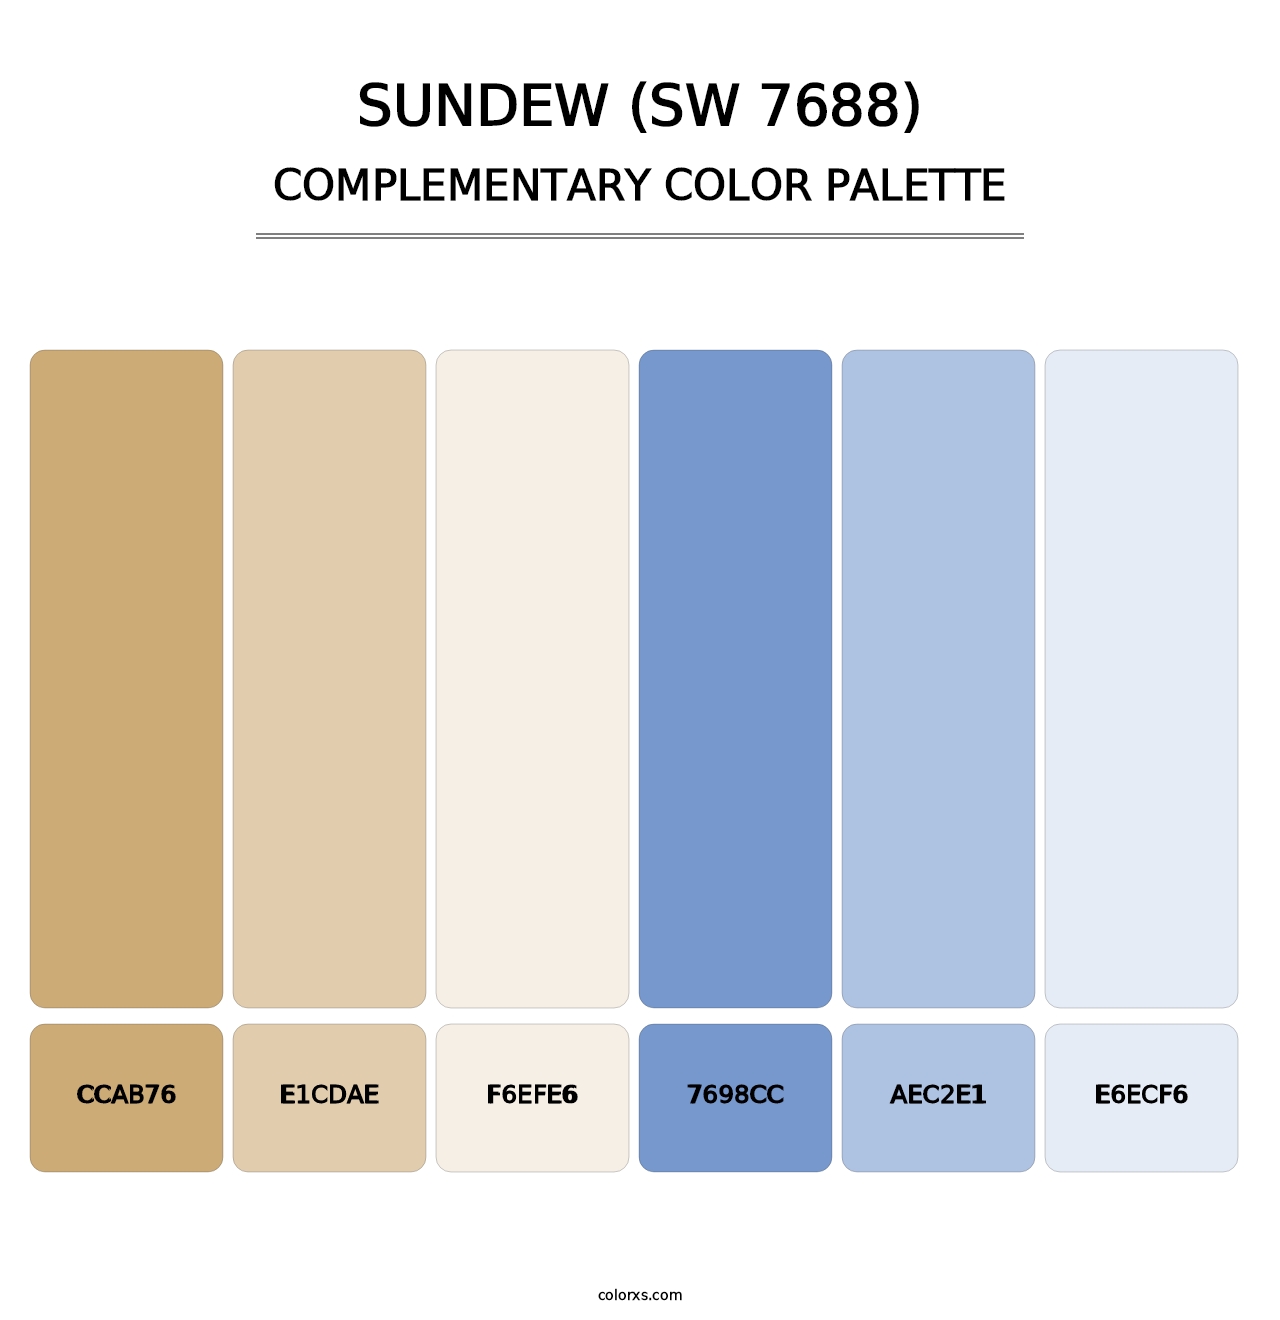 Sundew (SW 7688) - Complementary Color Palette